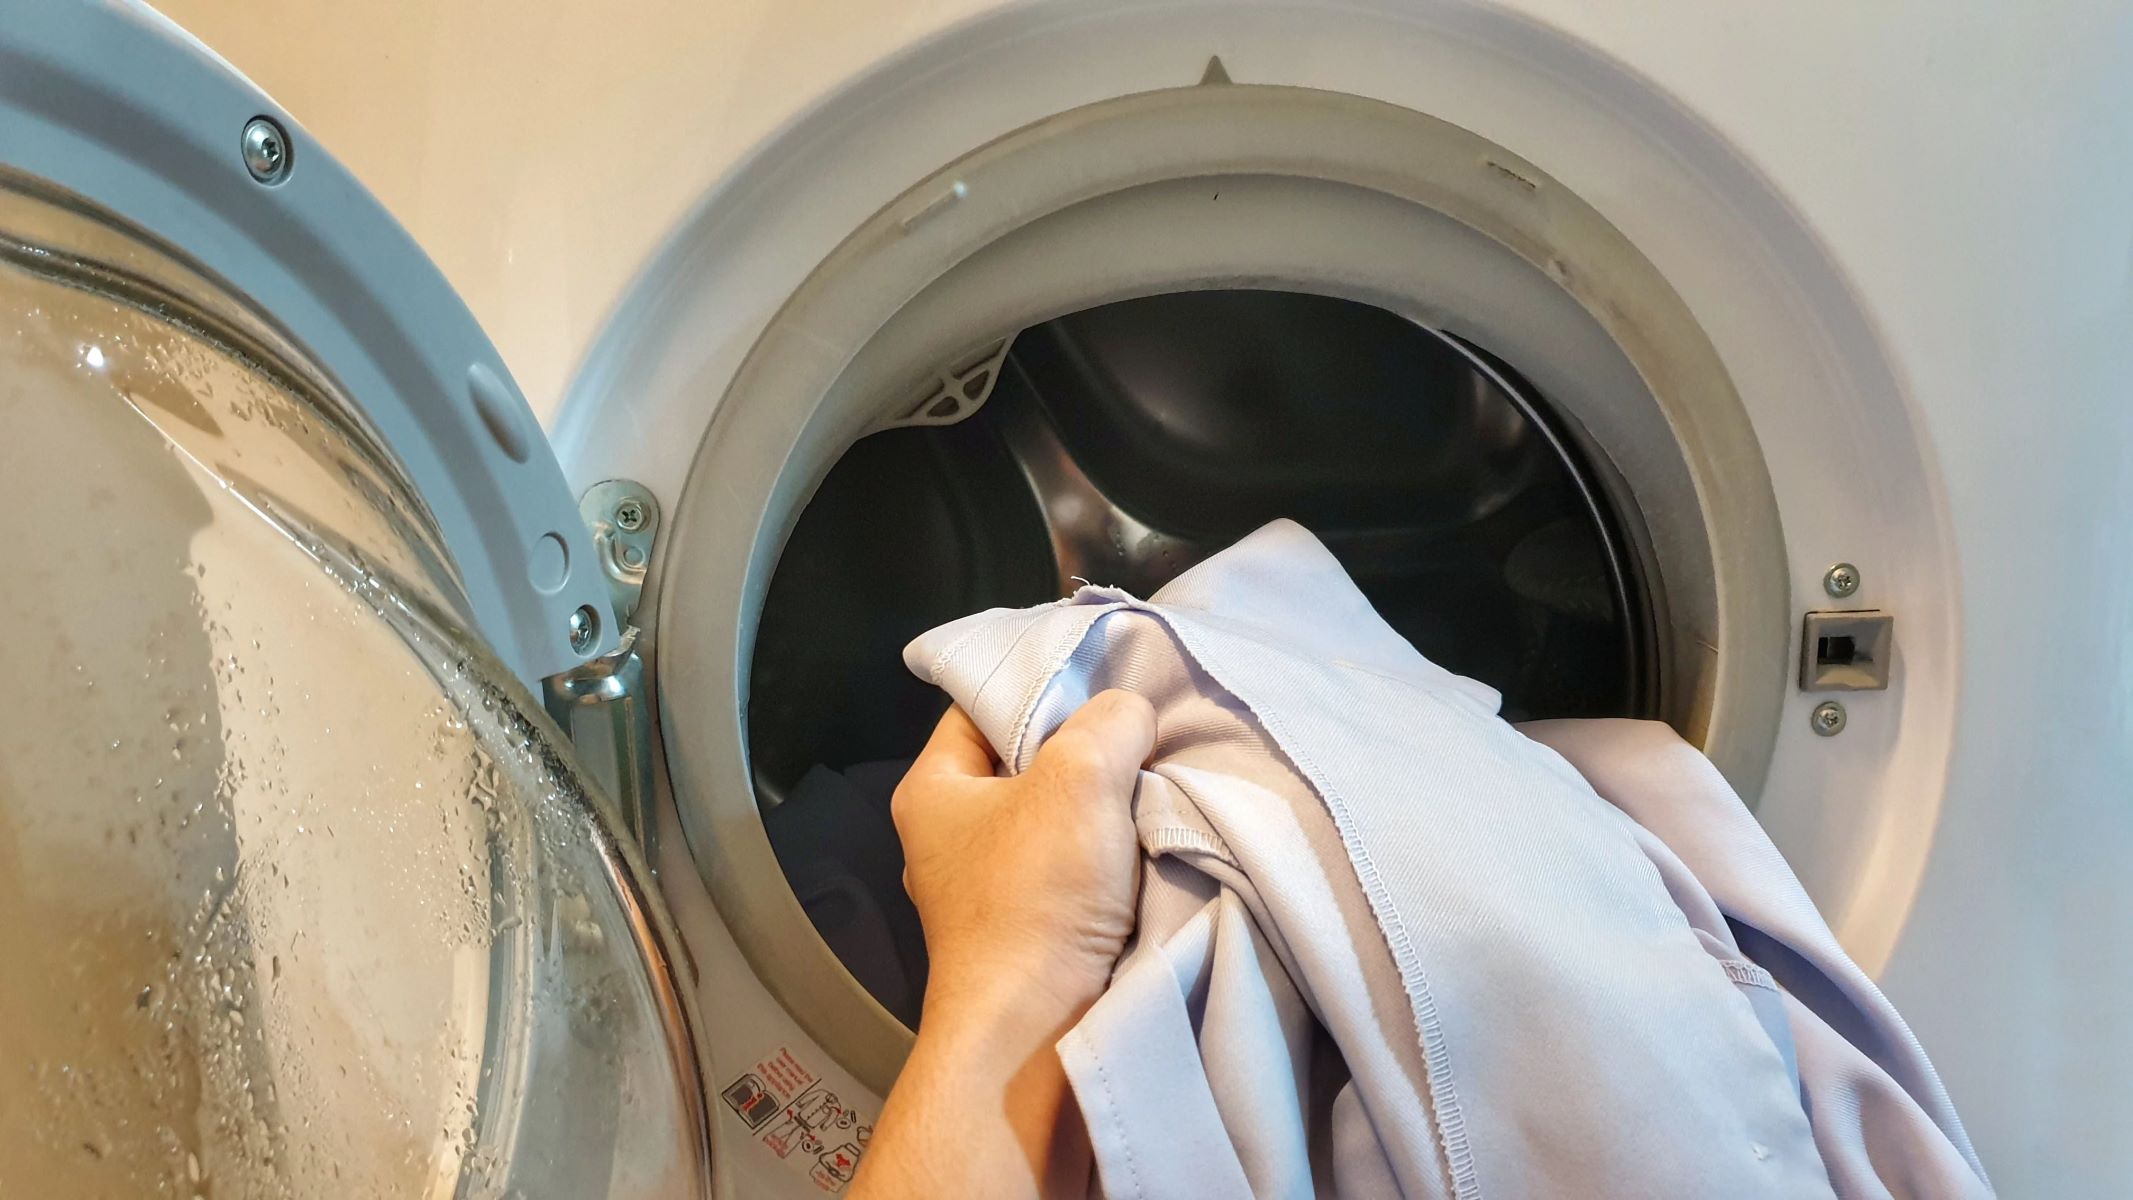 Revolutionary Hack: Dry Soaking Wet Clothes In The Dryer!